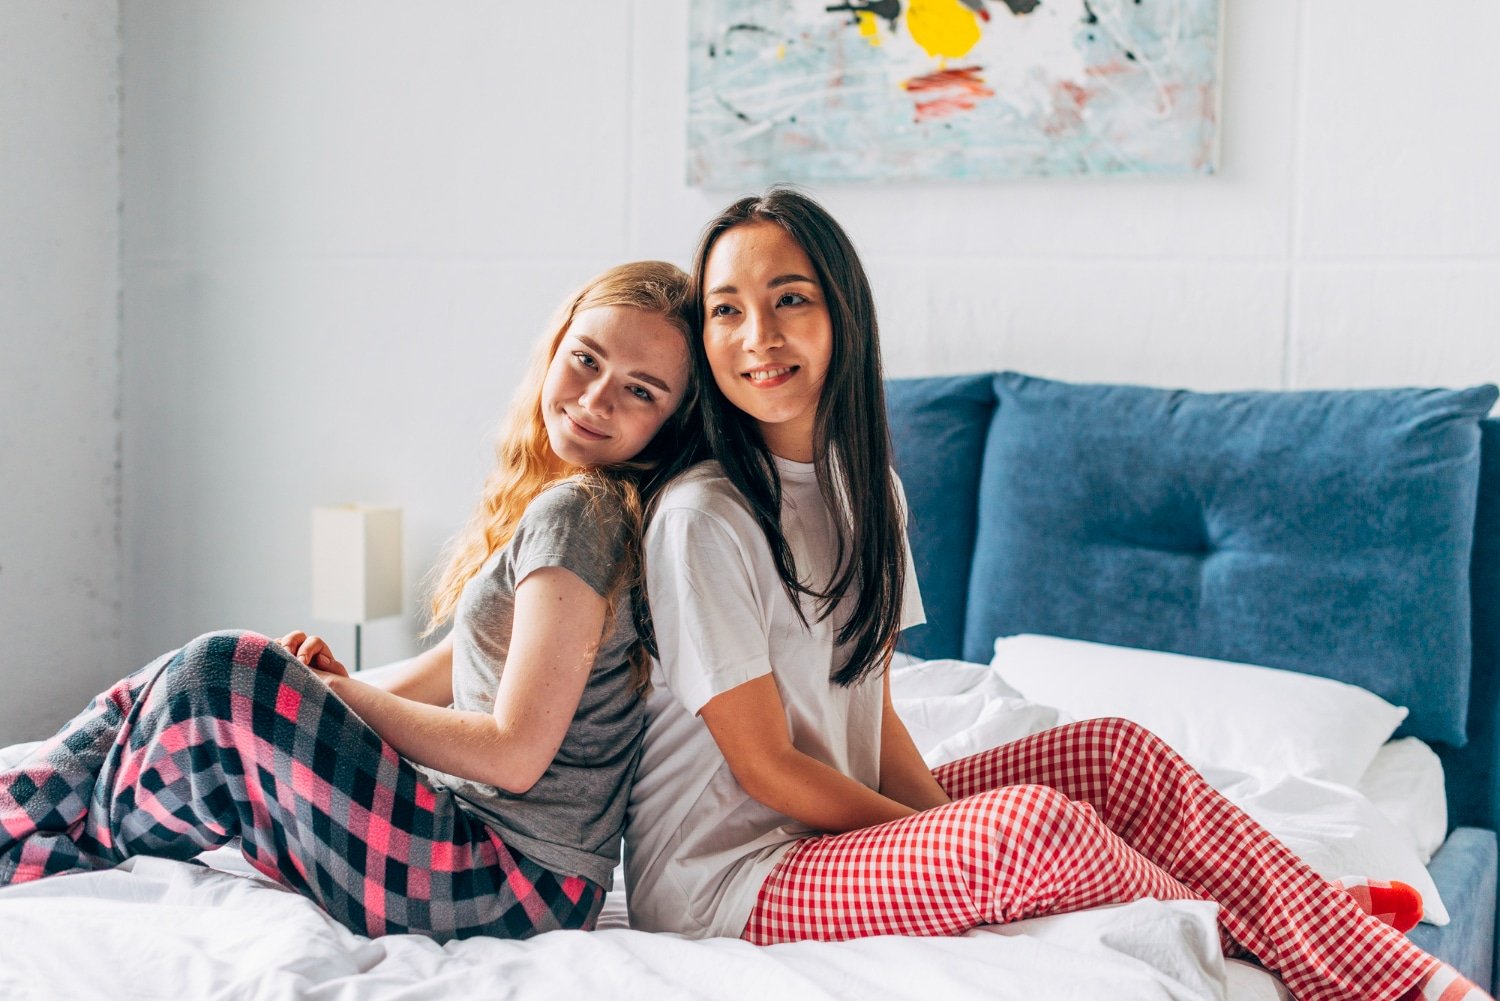 Read more about the article Sleep Comfortably And Stylishly With Chelsea Peers NYC’s Trendy Sleepwear